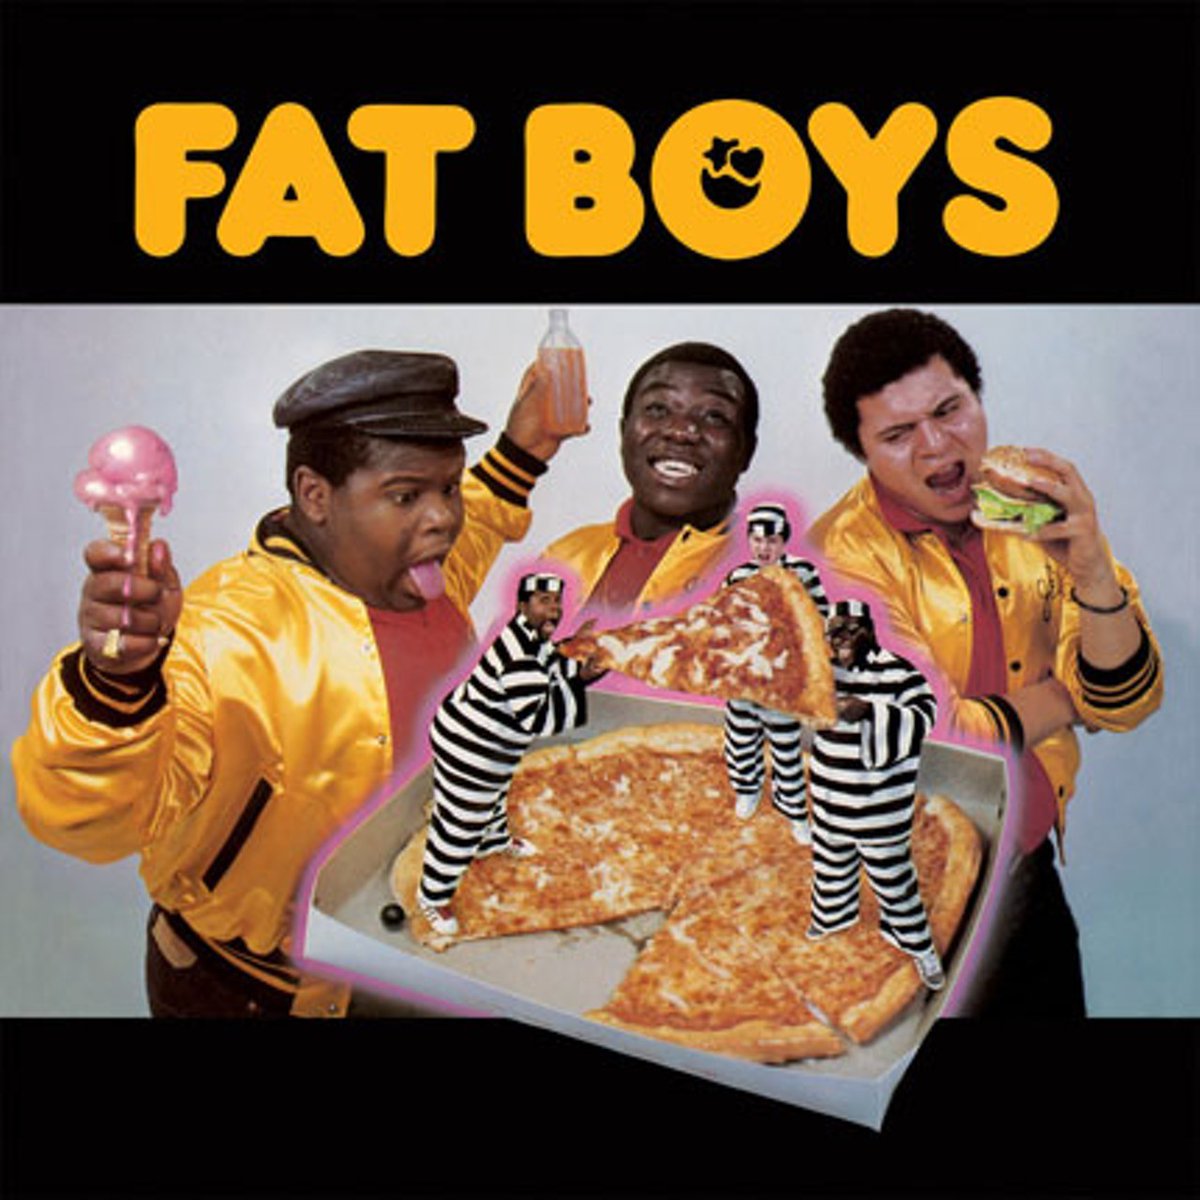 Today in Hip-Hop History: The Fat Boys’ Self Titled Debut Album Turns 40 Years Old! ow.ly/Broe105uP7n #WeGotUs #SourceLove